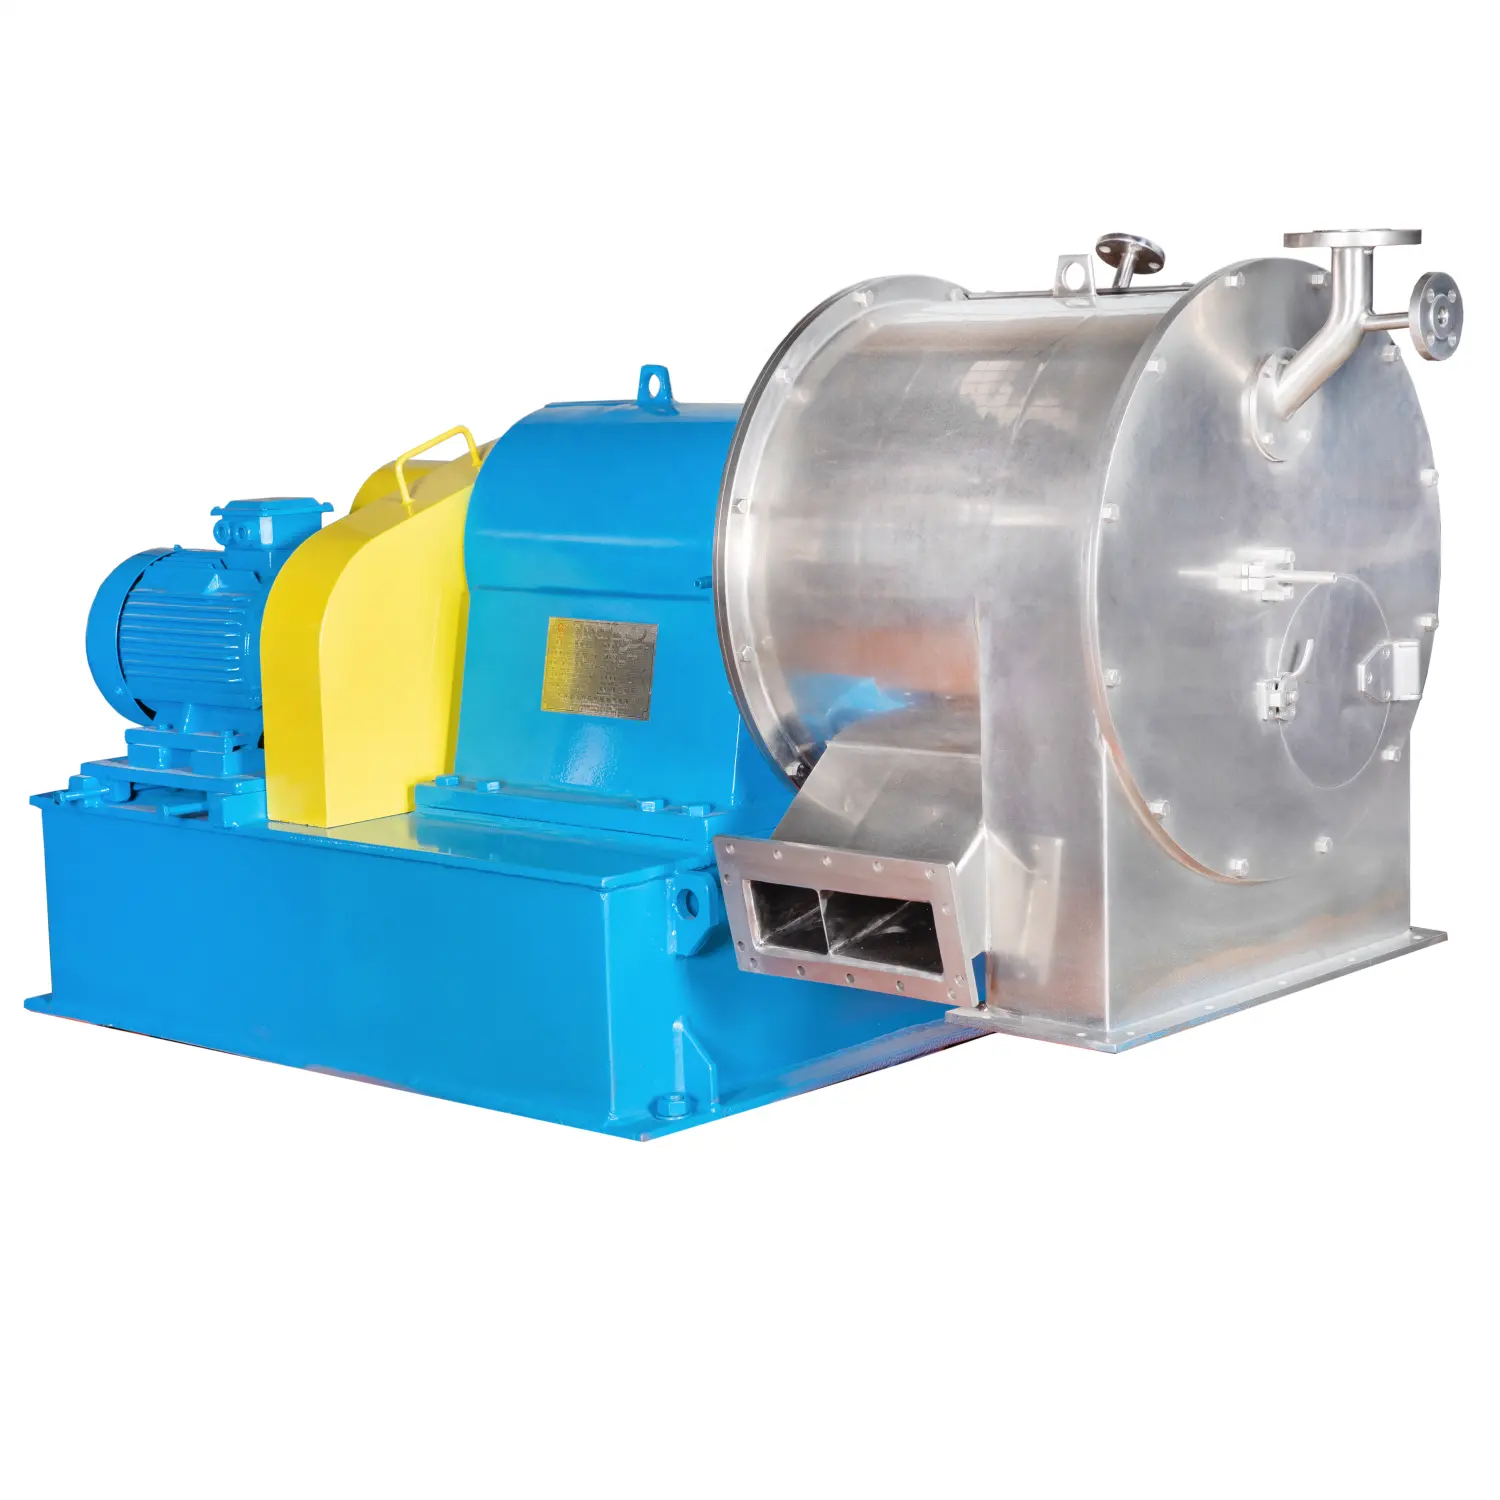 Saideli HR series centrifuge pusher salt with high recovery rate